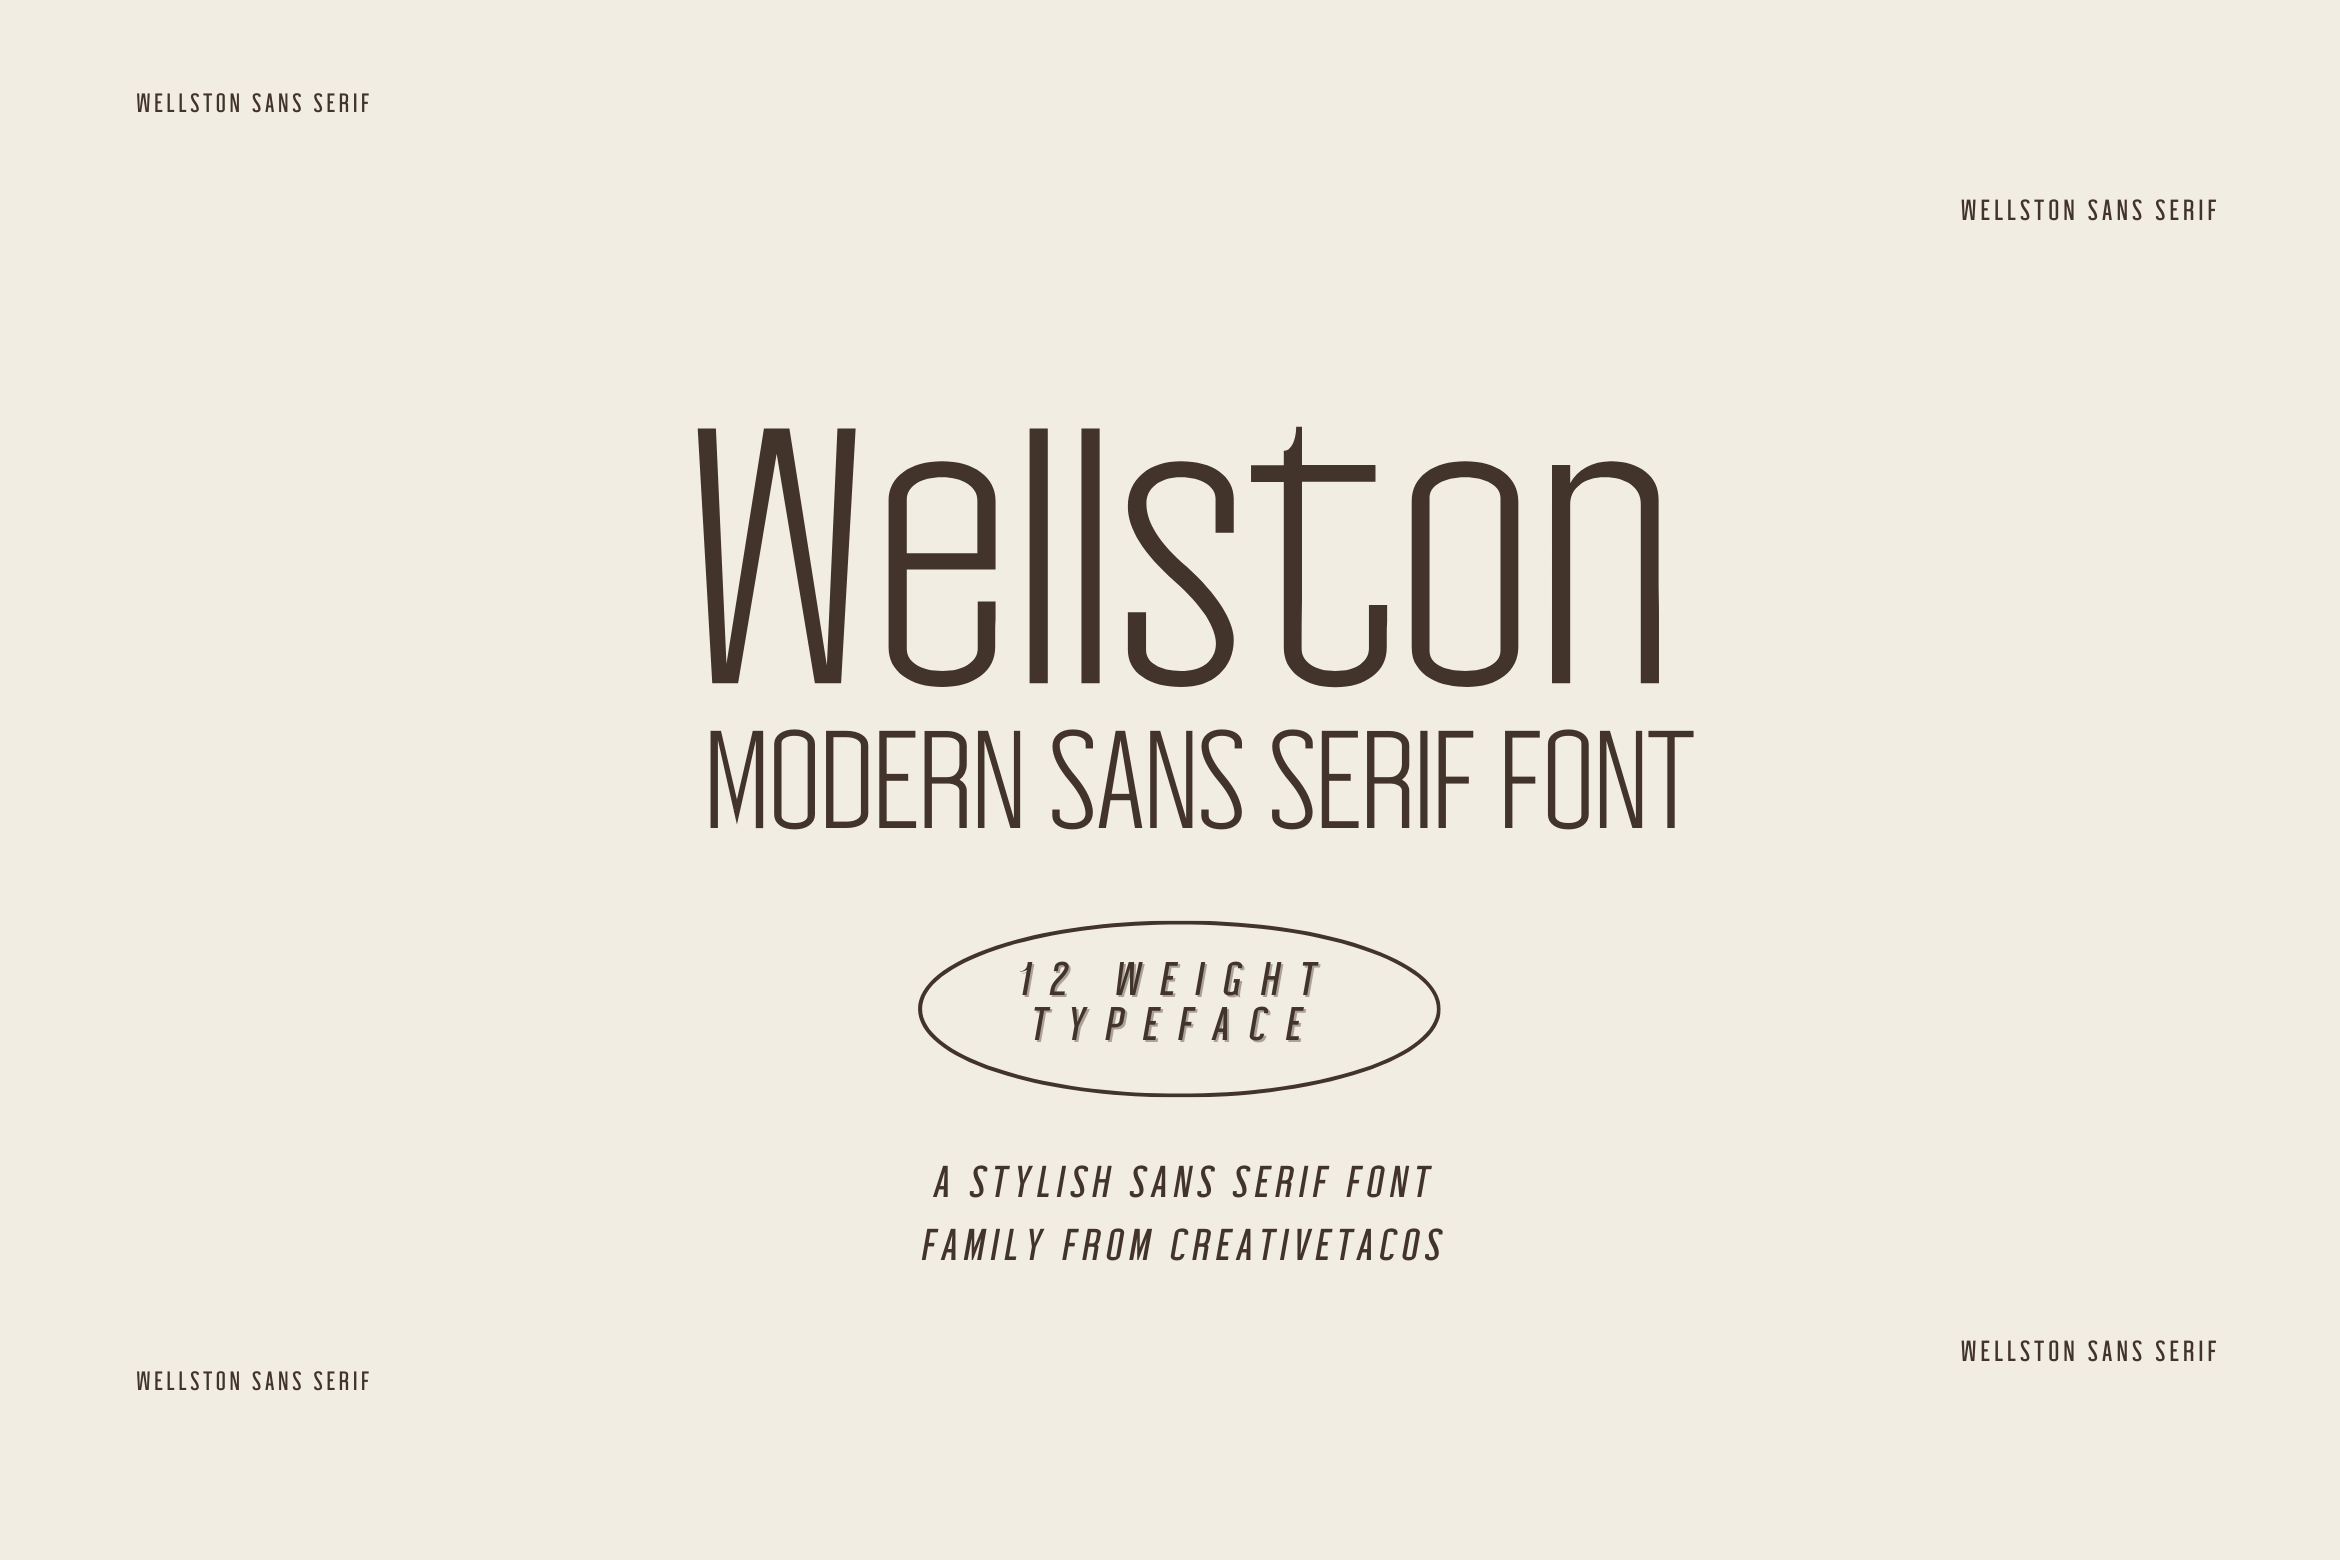 A neutral tan background featuring "Wellston MODERN SANS SERIF FONT" in large letters with "12 WEIGHT TYPEFACE" below, showcasing the font's range, all in Wellston font.